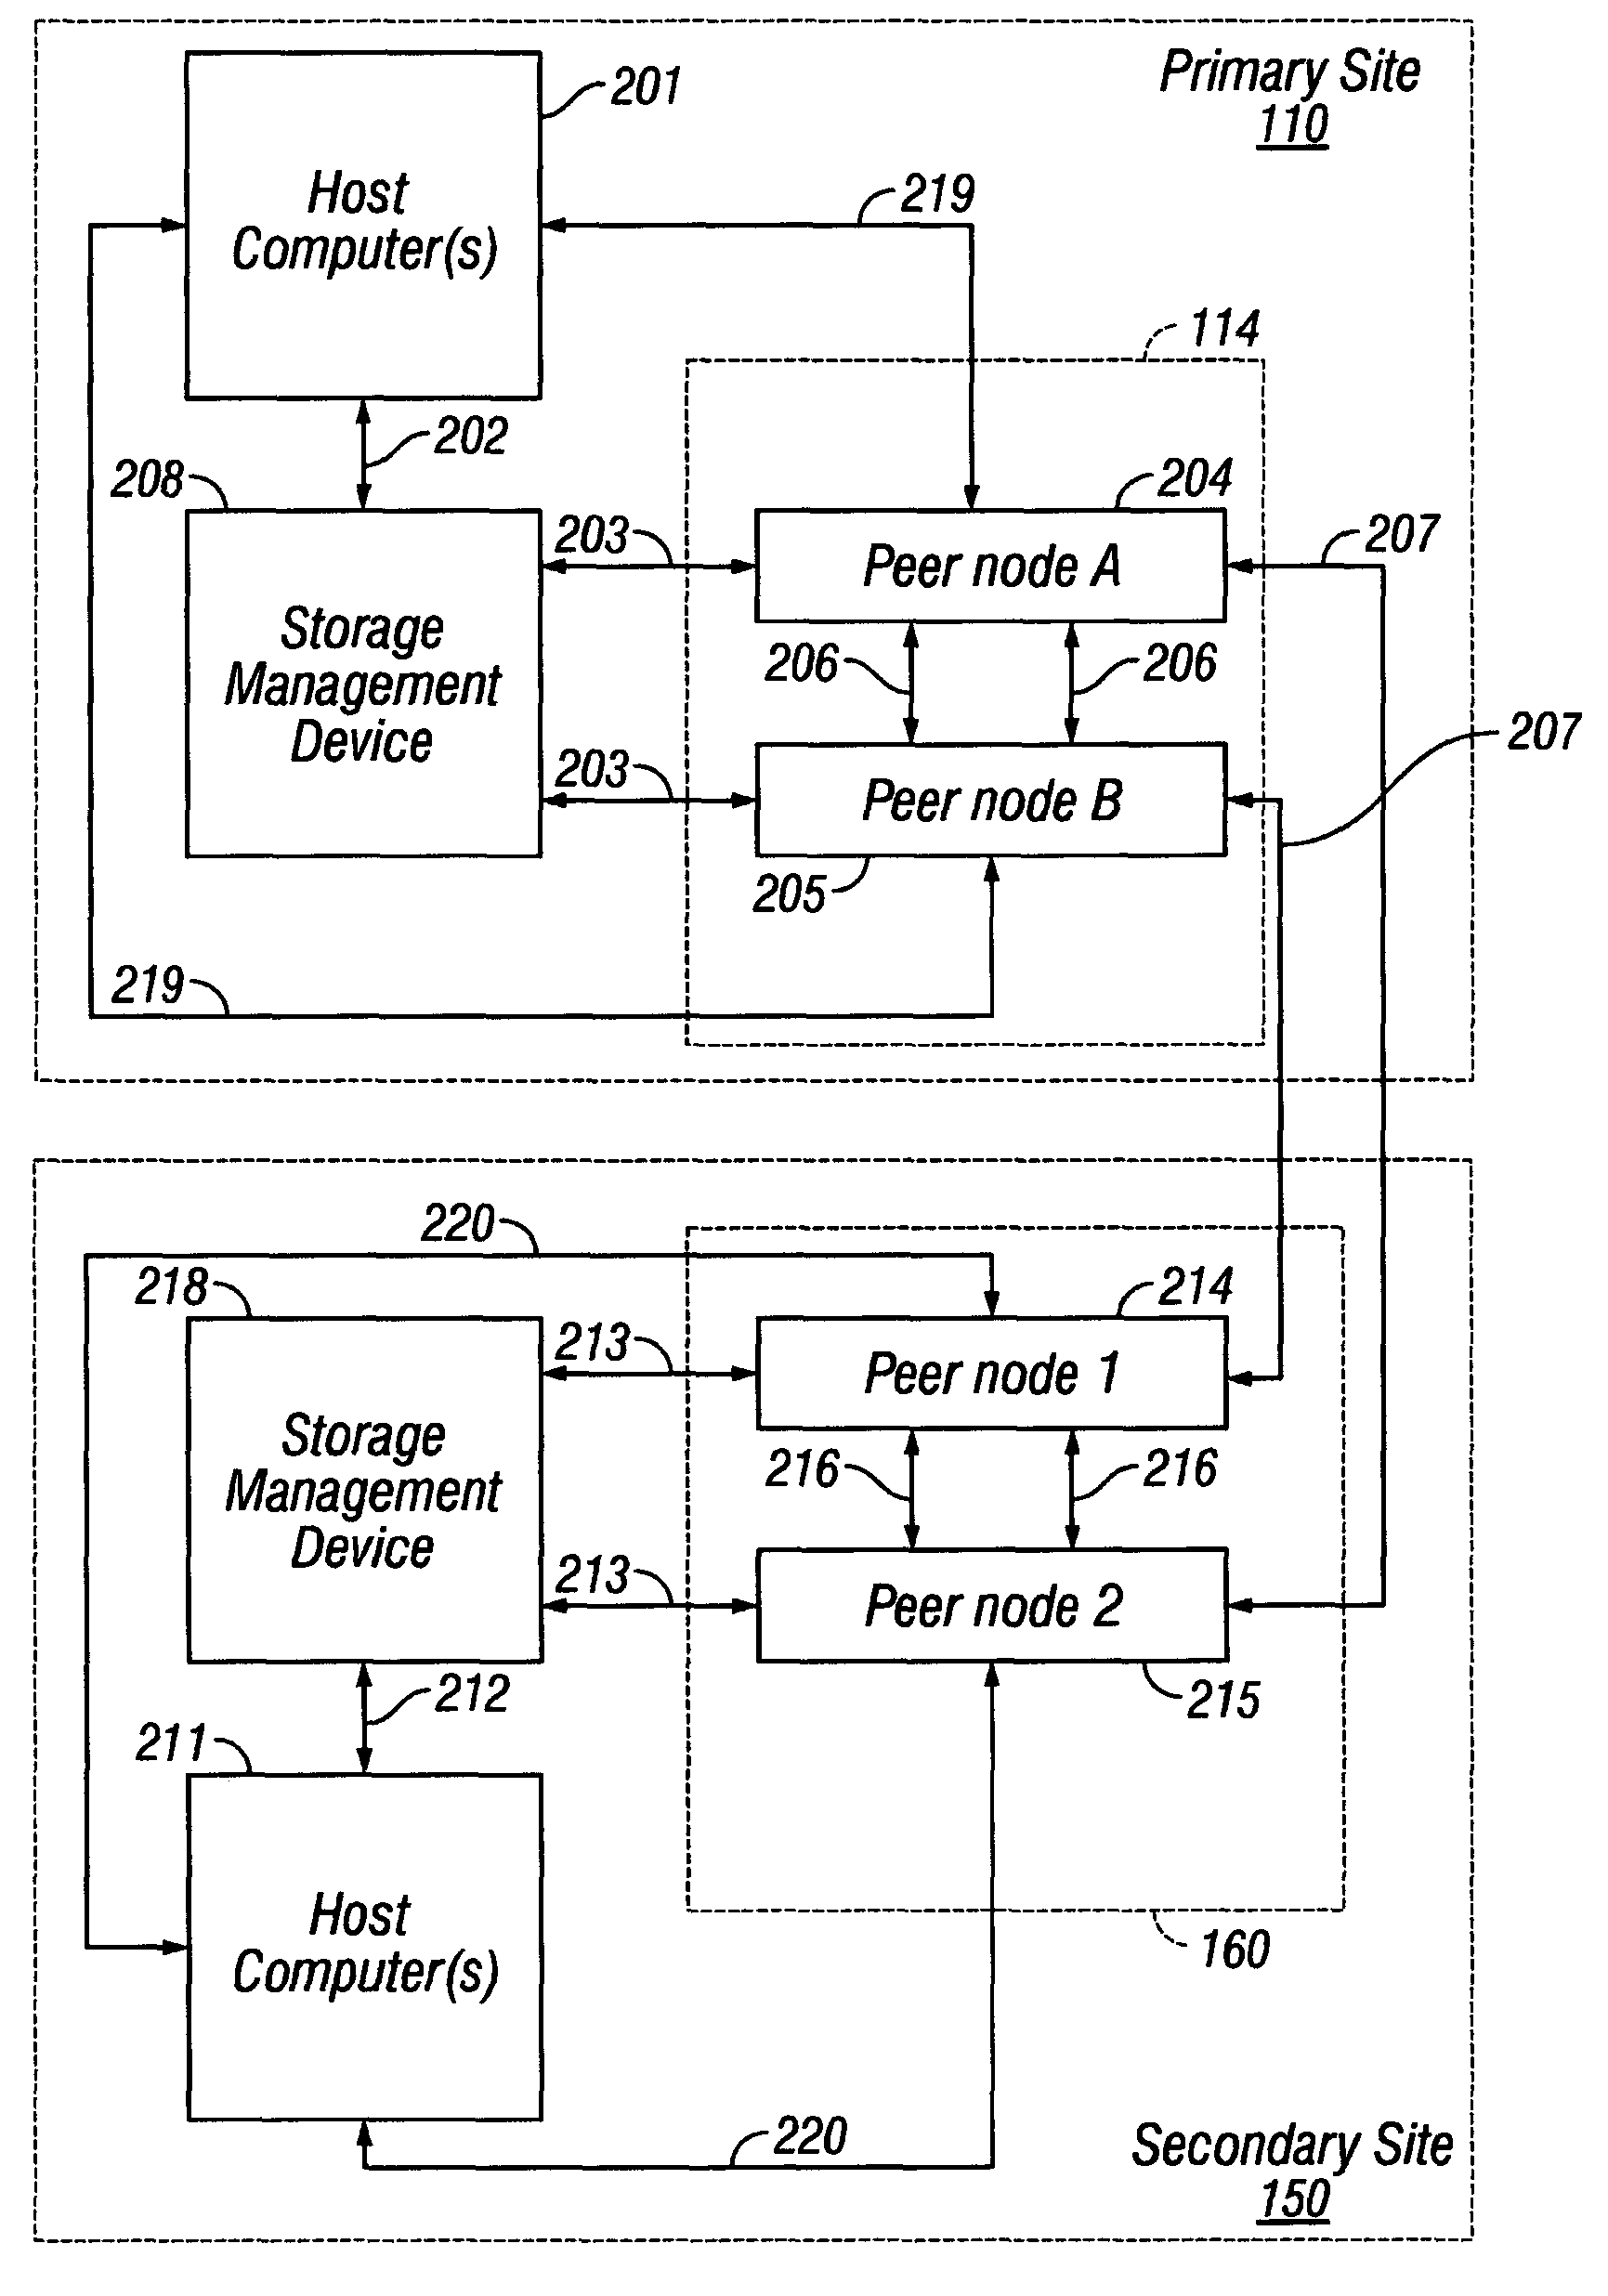 Autonomic predictive load balancing of output transfers for two peer computers for data storage applications